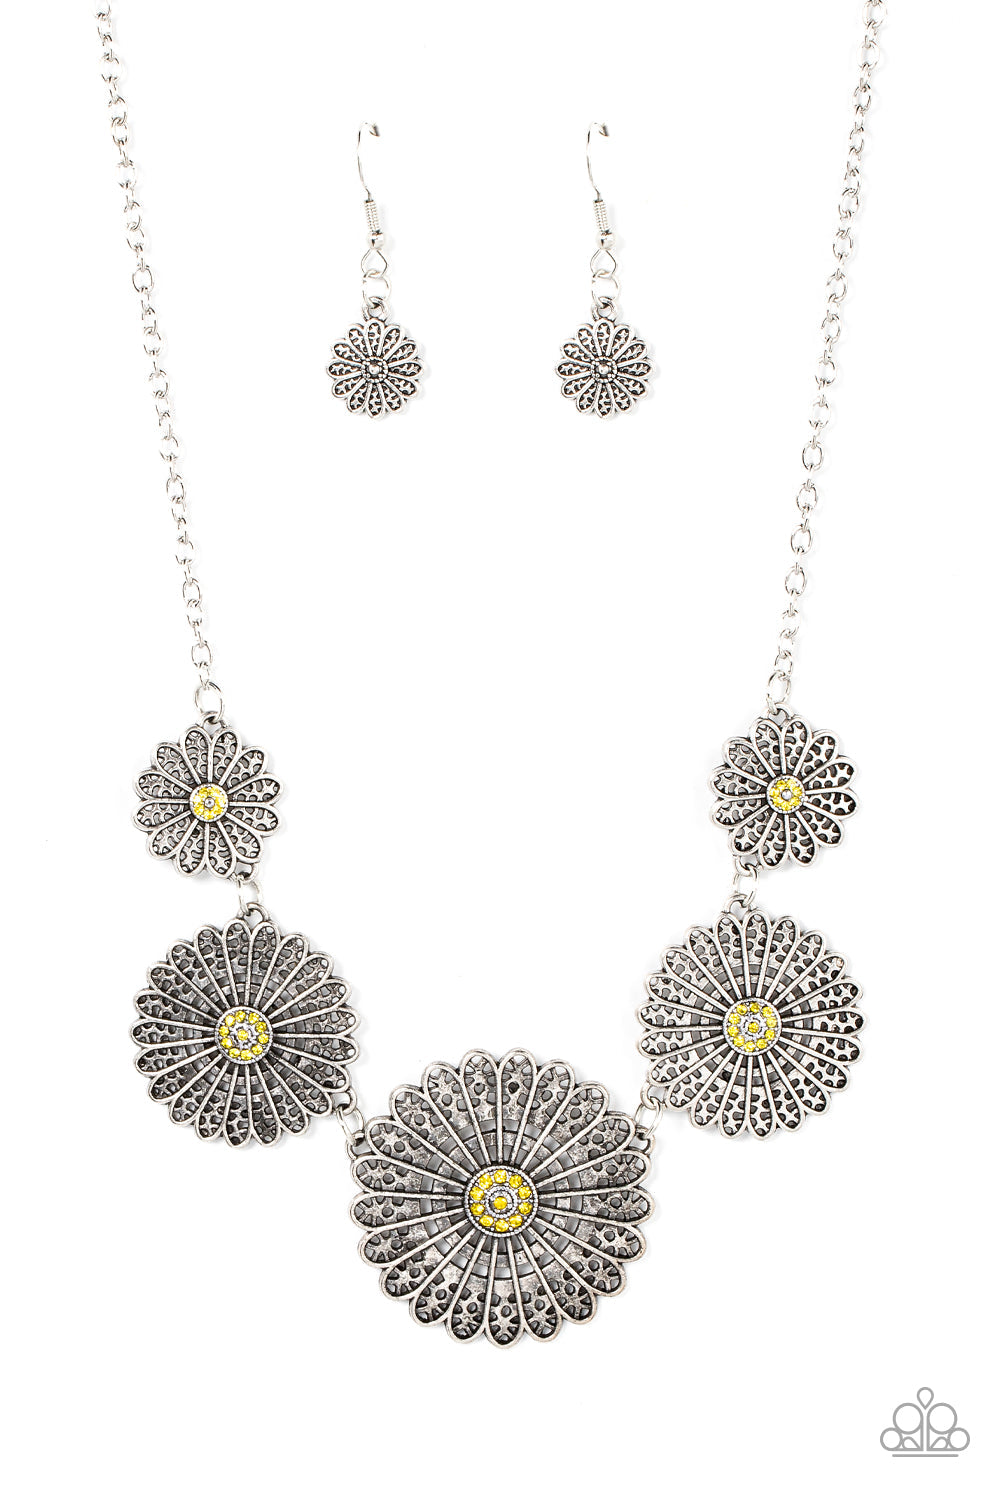 Marigold Meadows - Yellow and Silver Floral Necklace - Paparazzi Accessories - Infused with a whimsical mandala-like motif, tactile silver petals bloom from yellow rhinestone dotted centers below the collar. The mismatched silver flowers gradually increase in size, exaggerating the eye-catching details. Features an adjustable clasp closure.